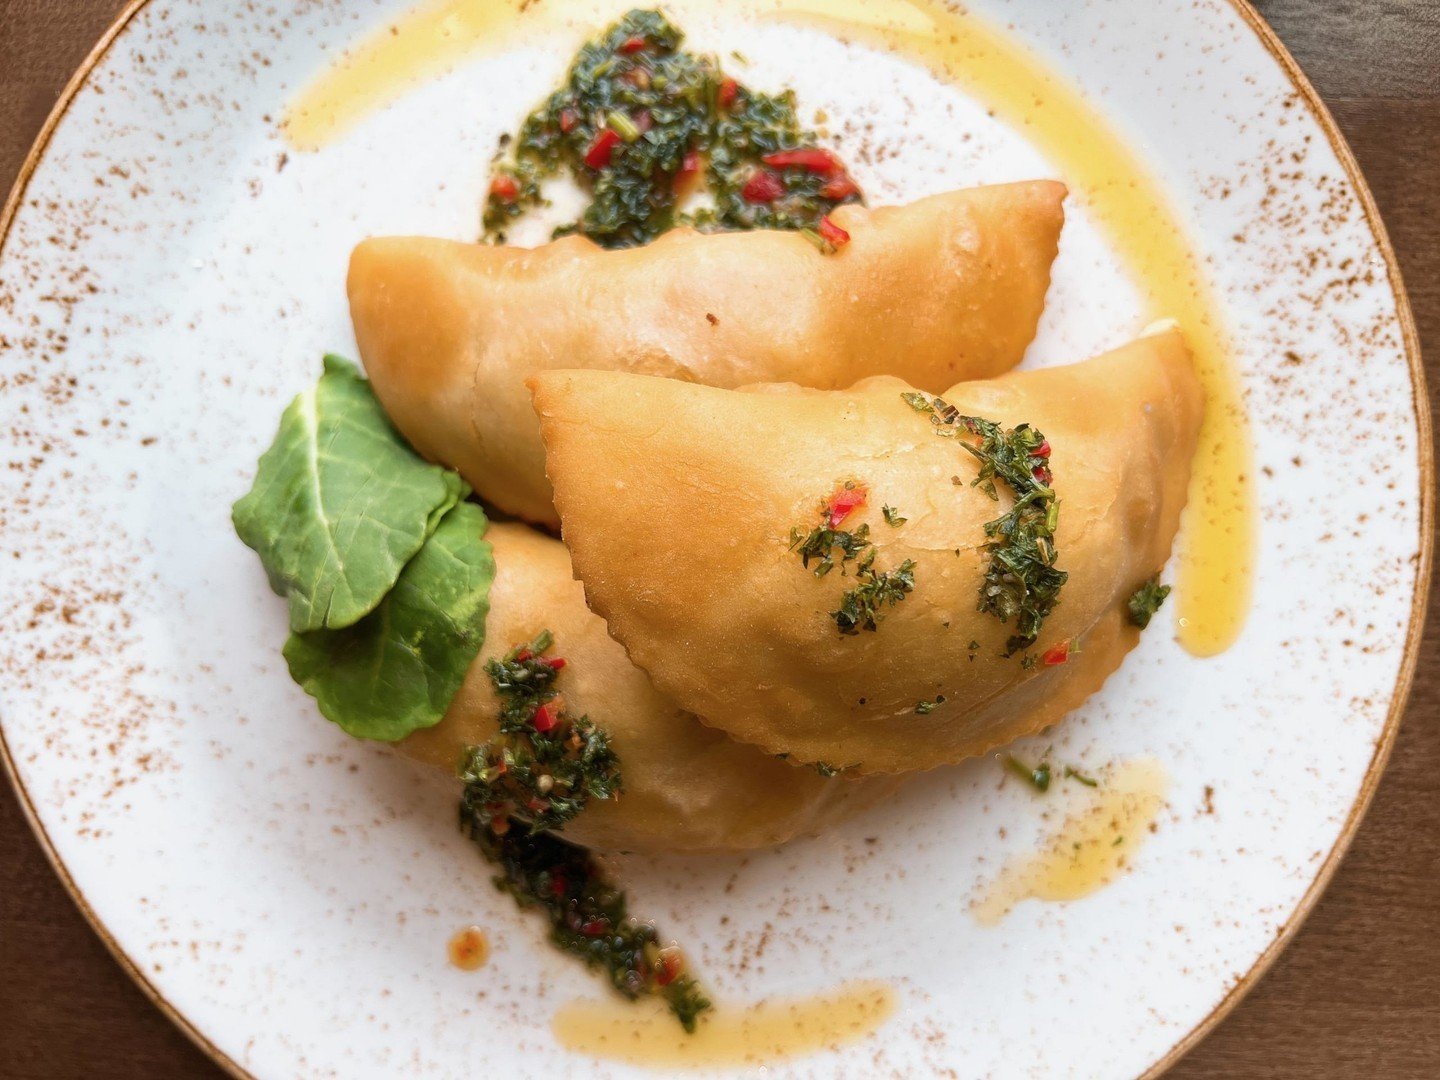 Unfold the flavors of the earth this #EmpanadaDay with our delicious beef short Rrb empanadas, dressed in vibrant chimichurri and tangy lemon tomato sauce. 🤤